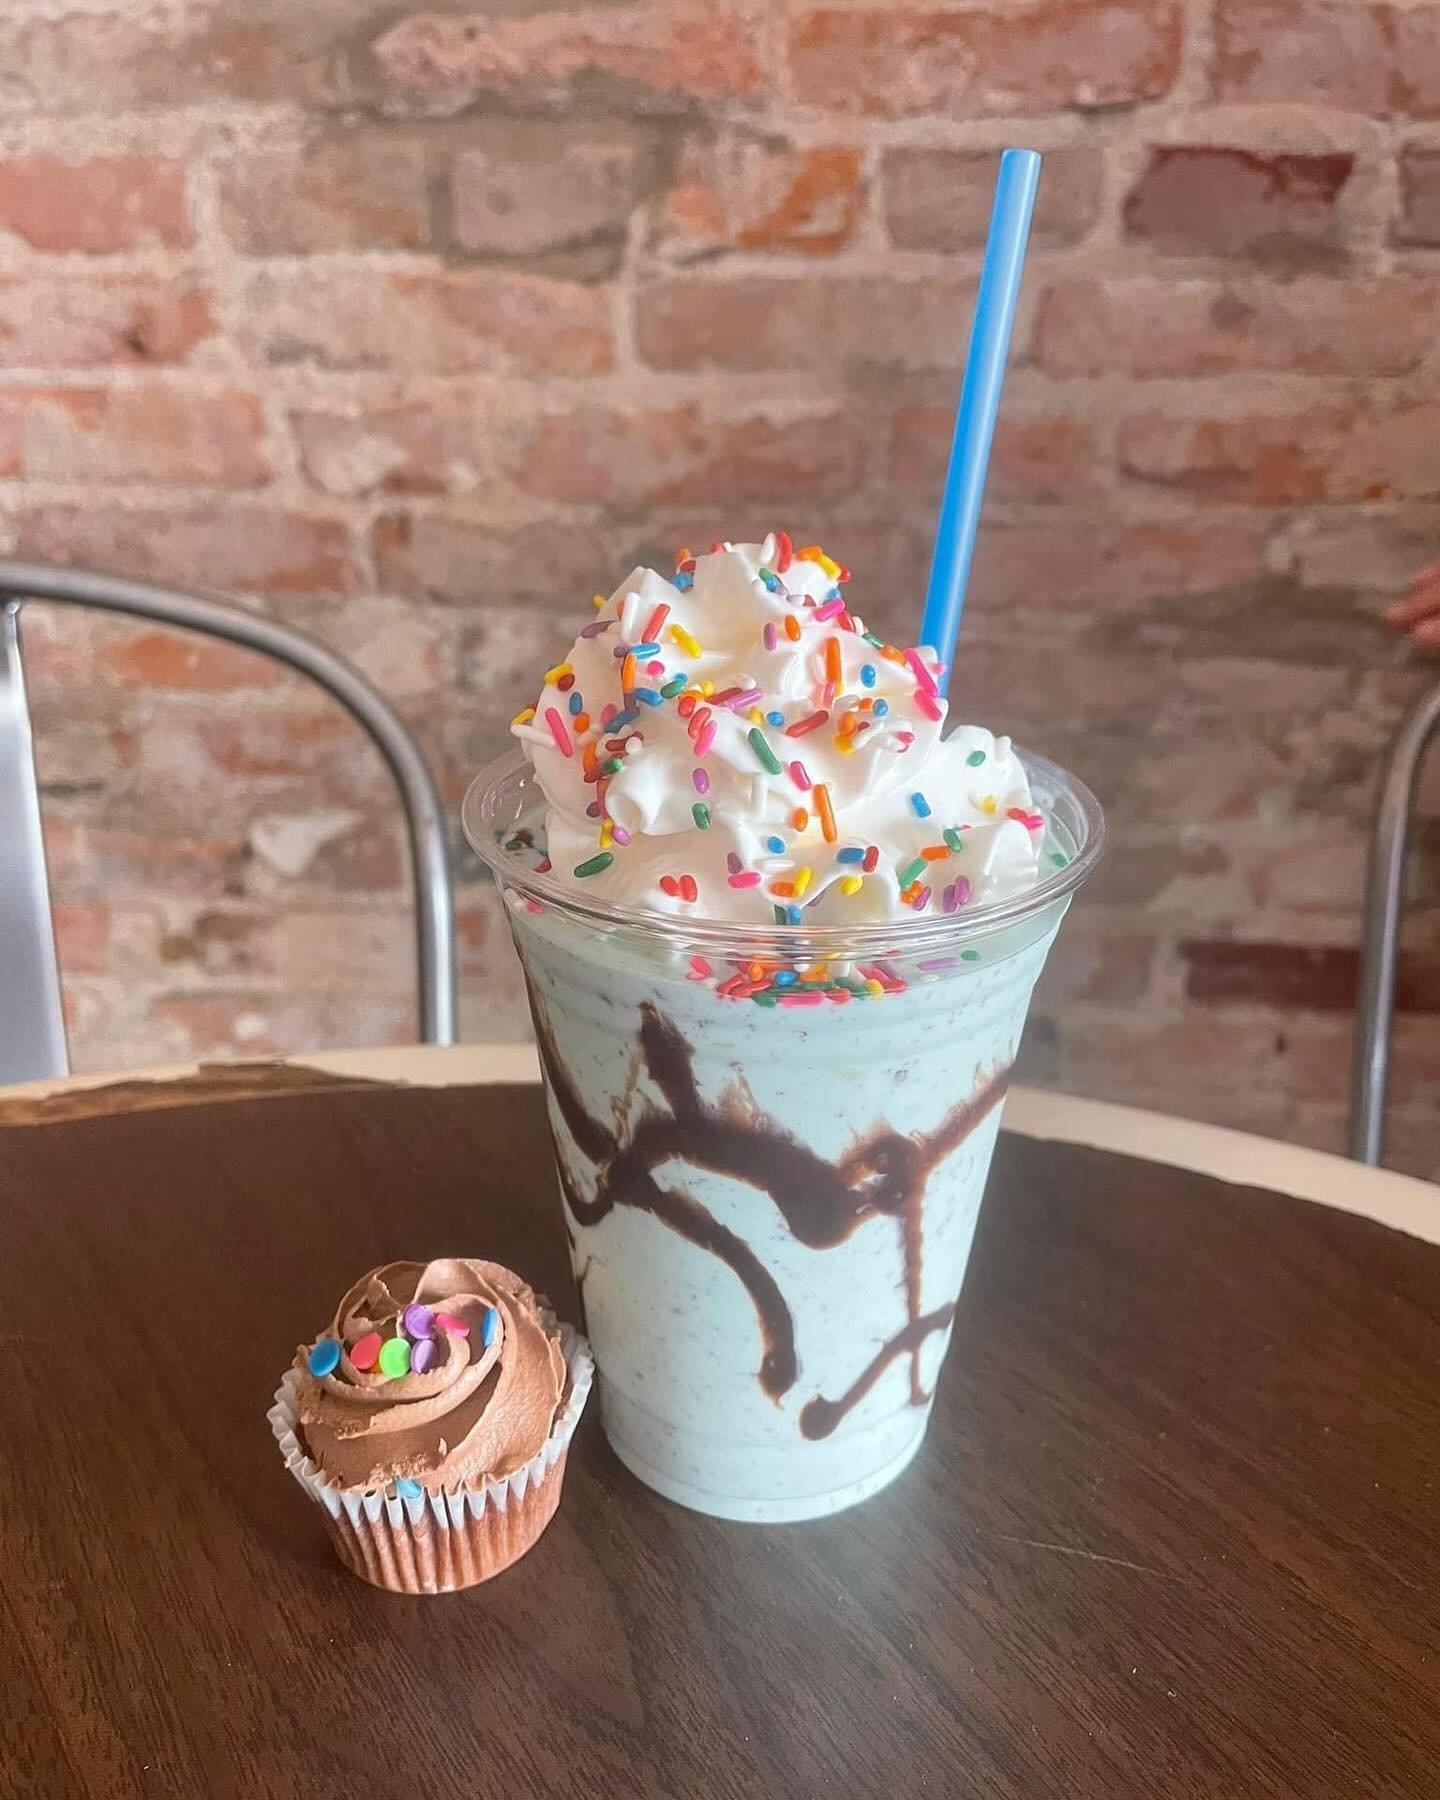 Go shawty, it&rsquo;s my birthday🥳 To celebrate, we&rsquo;re serving up Birthday Cake shakes blended with a whole cupcake! You can come party with me today until 8pm! See you soon🧁